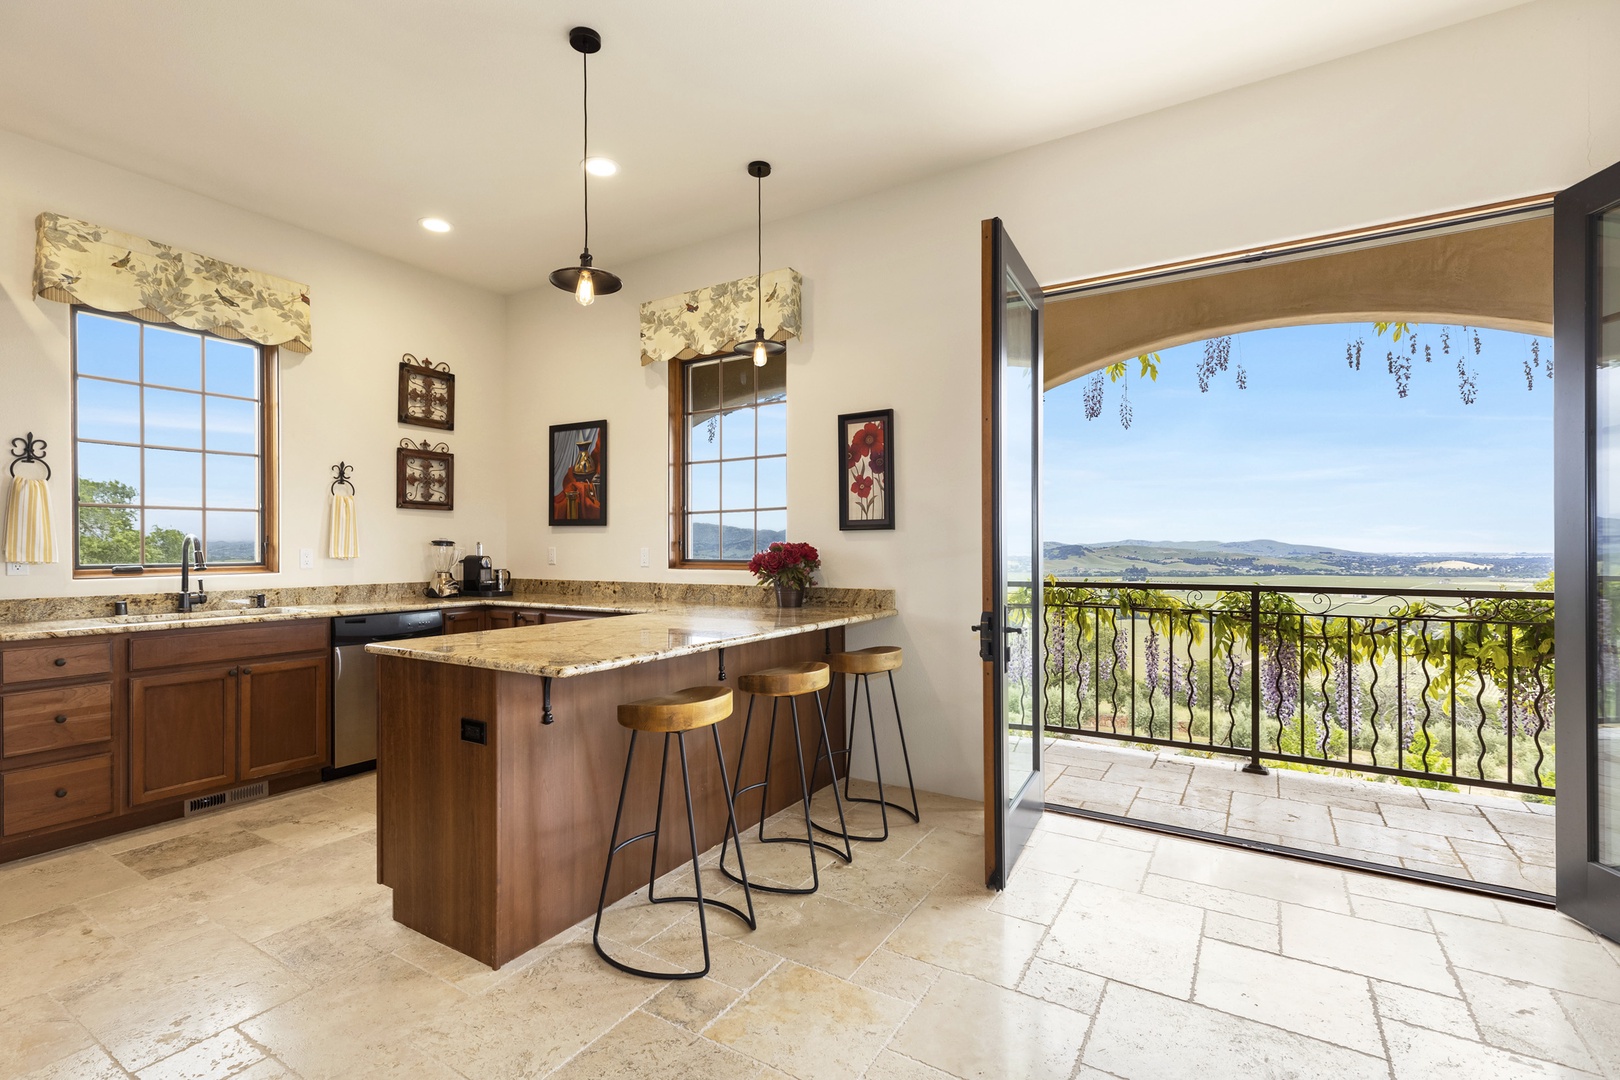 Fairfield Vacation Rentals, Villa Capricho - Gorgeous views from the guest house kitchen